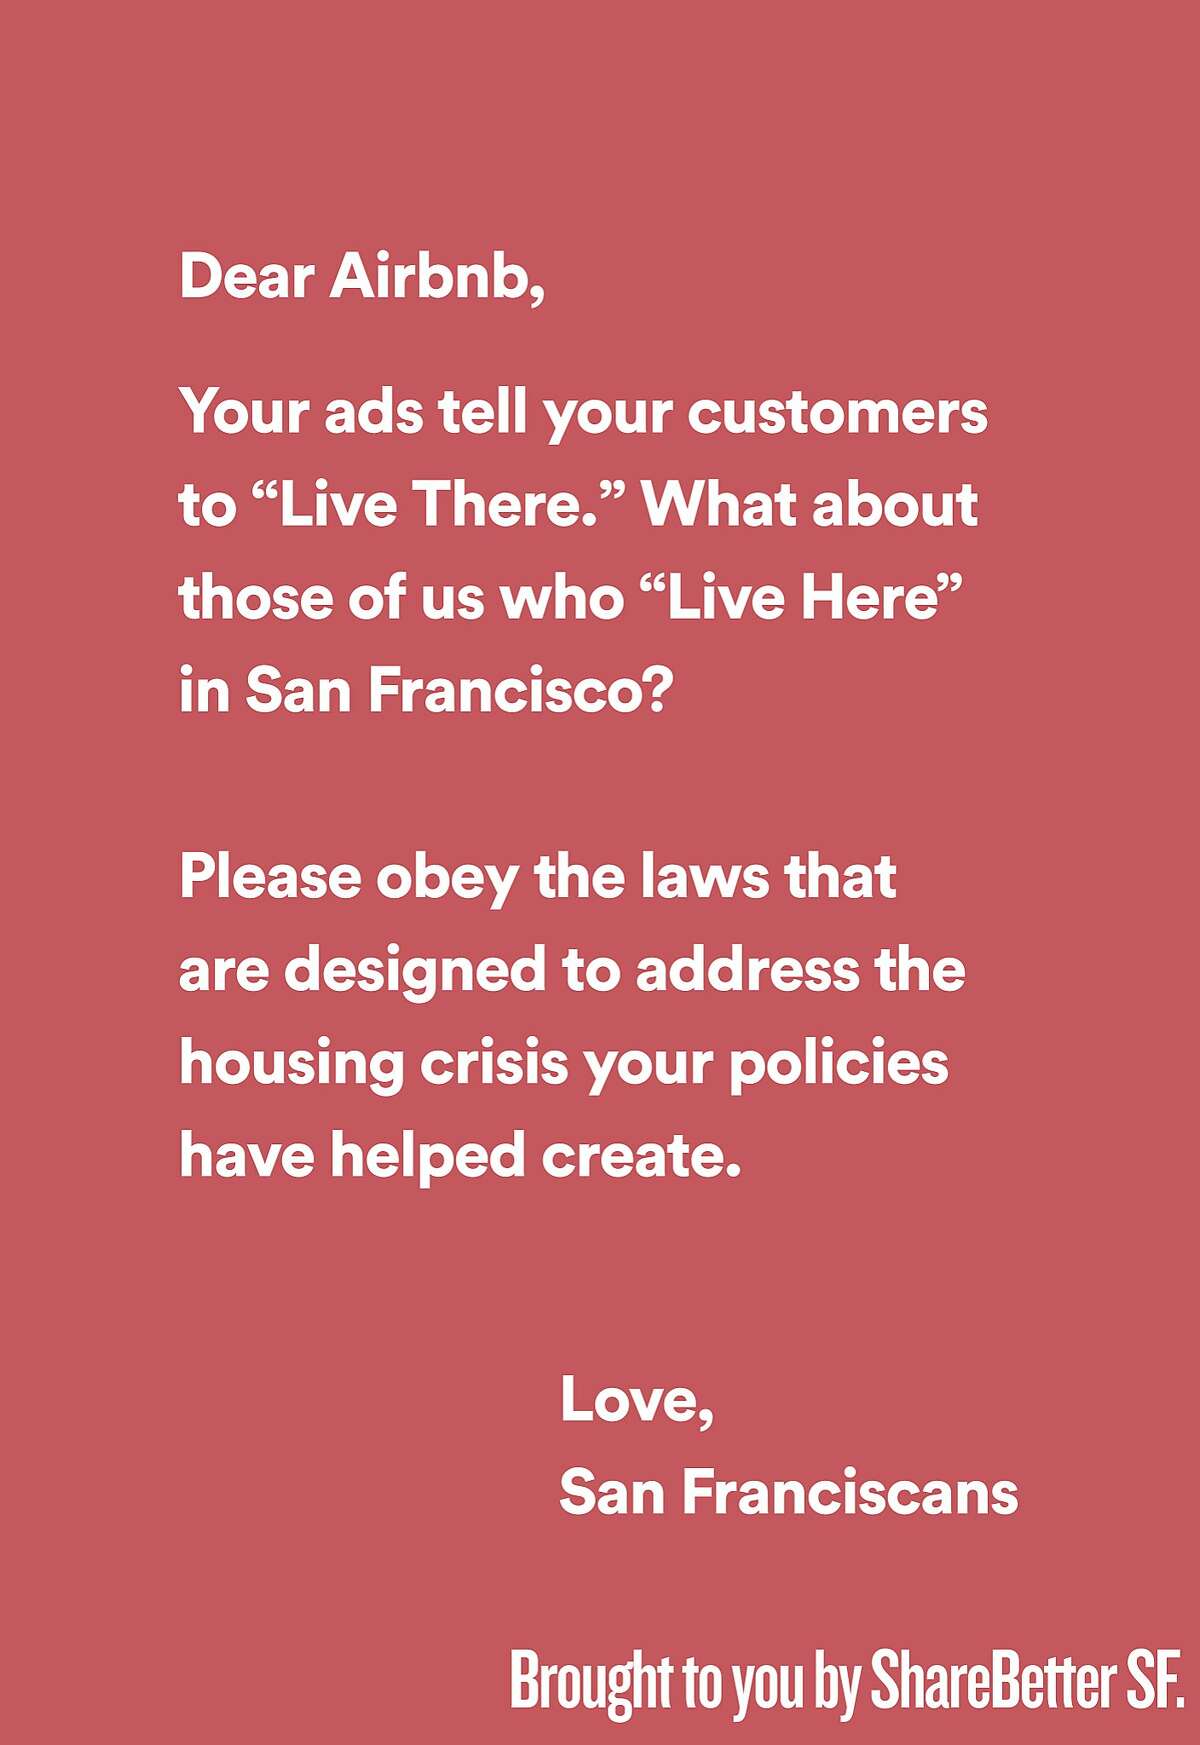 A new ad campaign by Share Better, an advocacy group, takes Airbnb to task for fighting San Francisco's short-term rental laws.